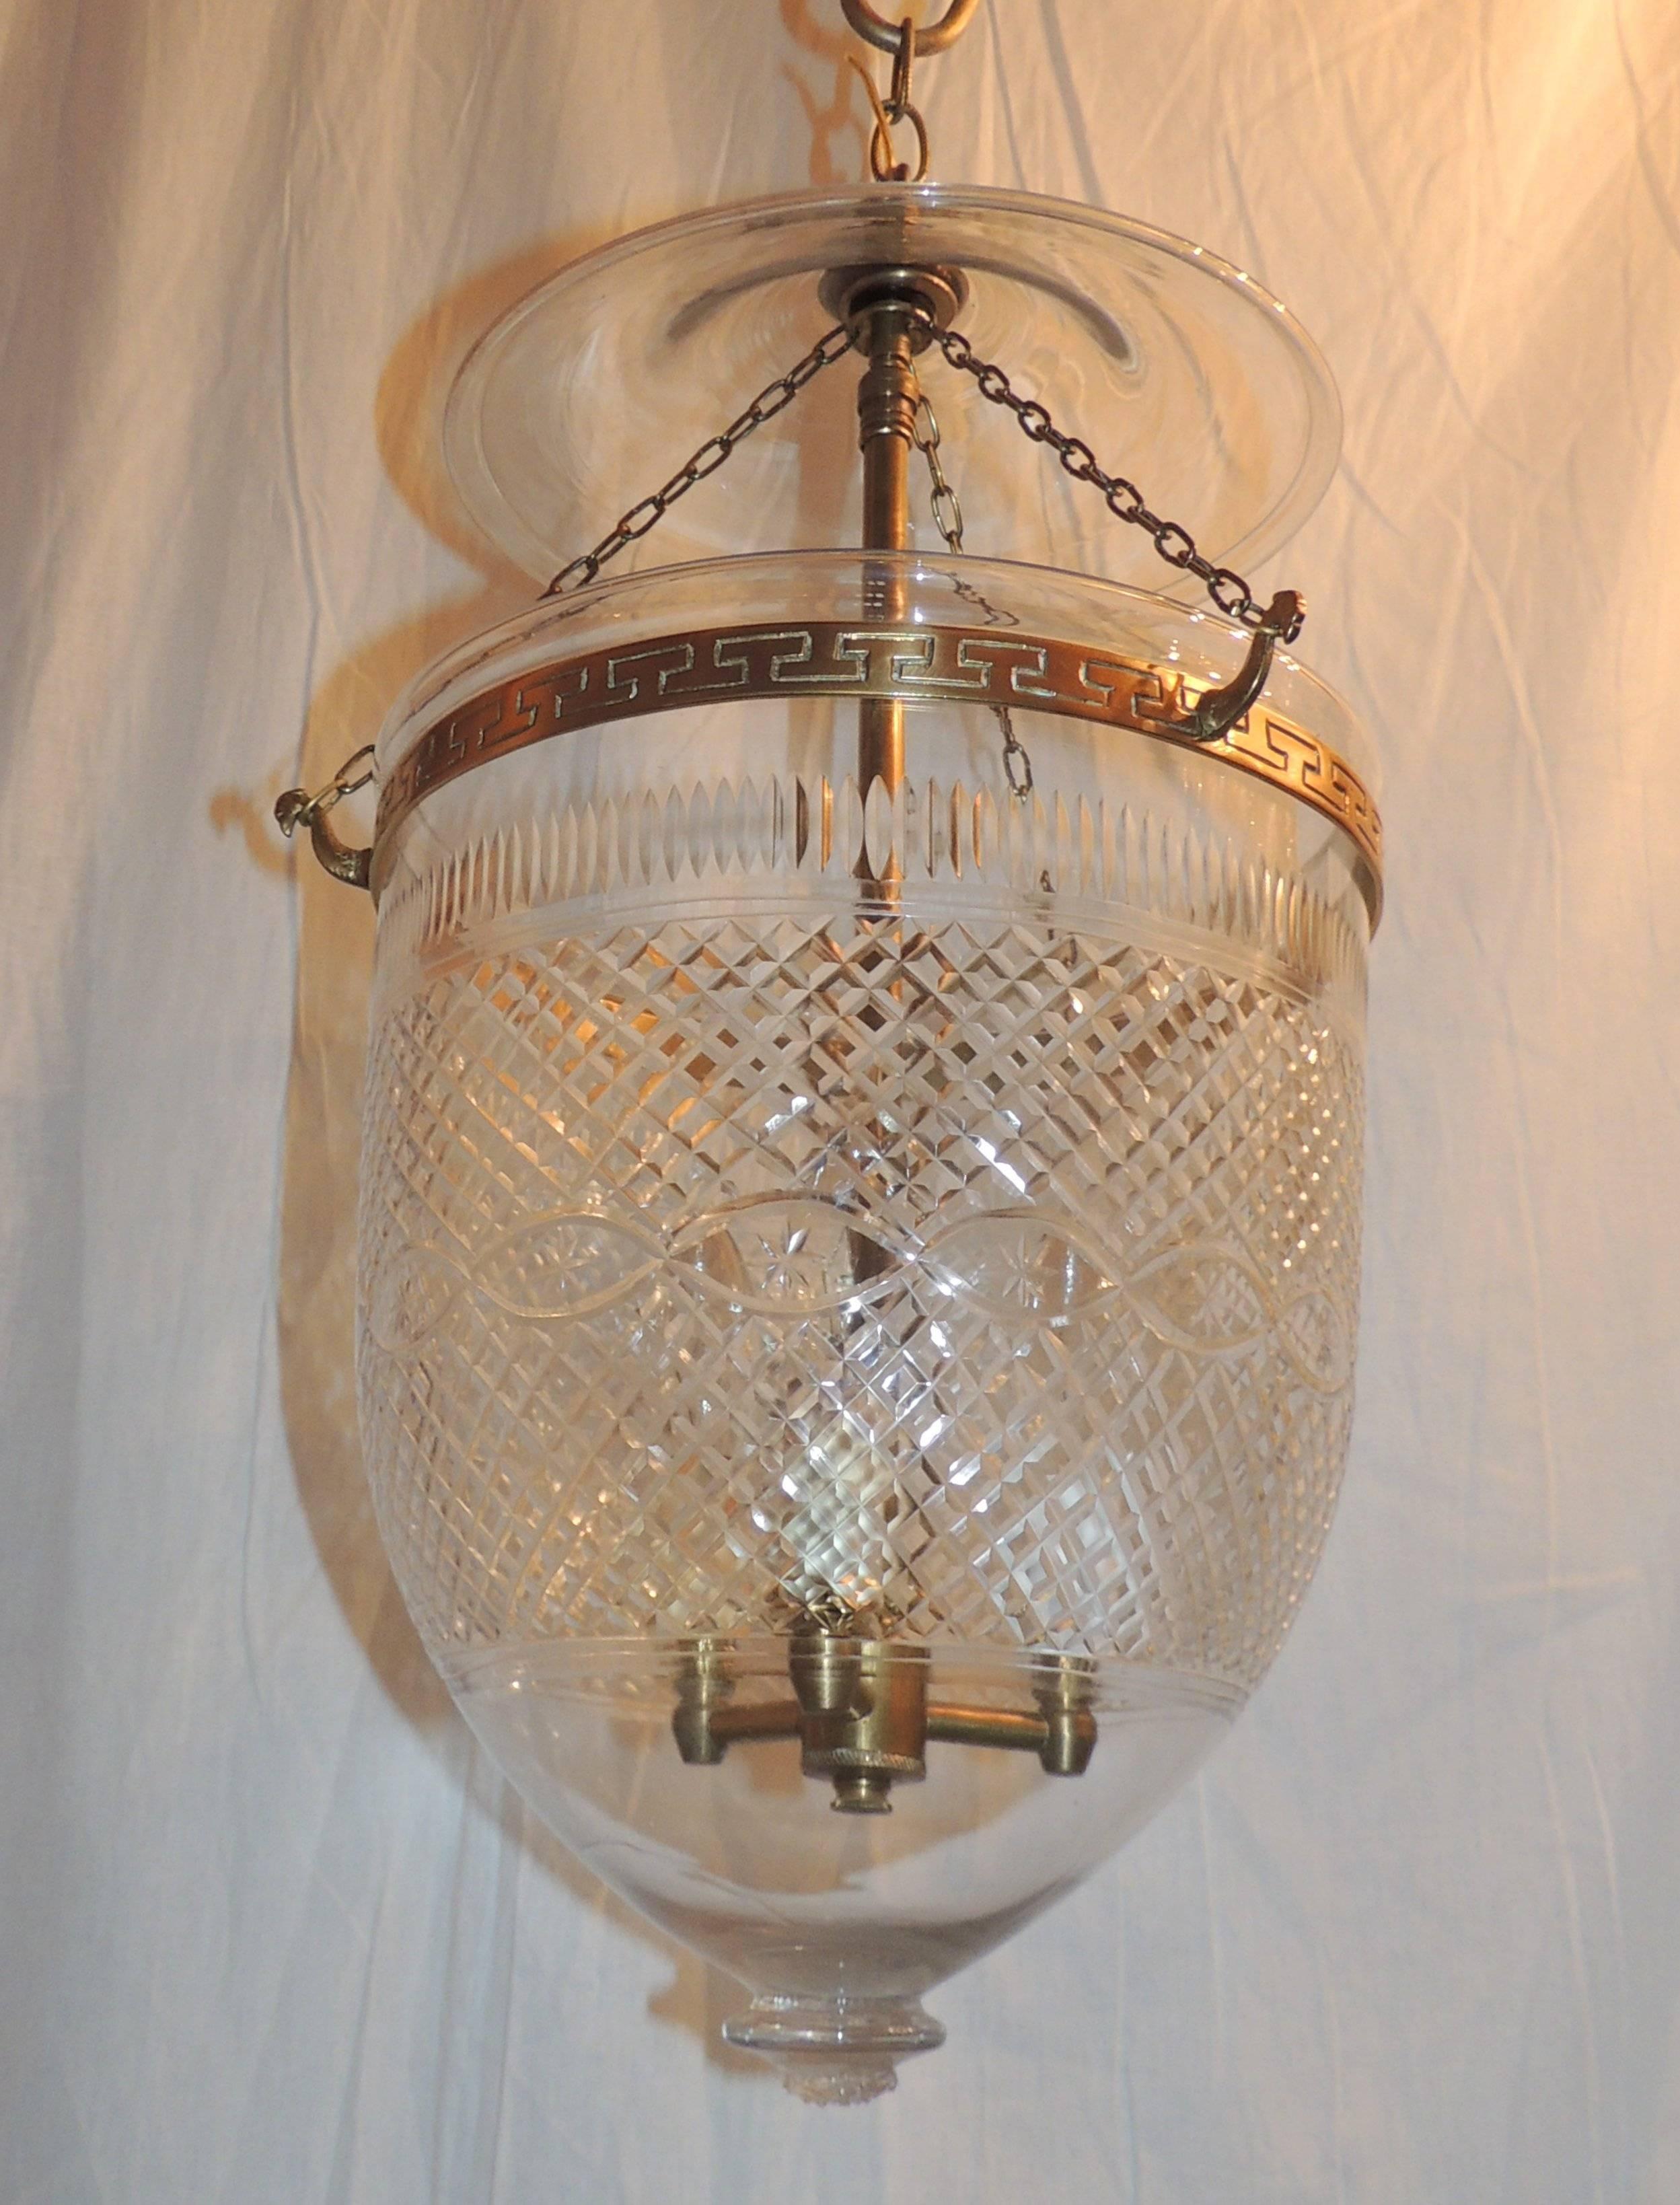 Pair of cut and etched crystal bell lanterns with bronze Greek key design.

Measures: 10